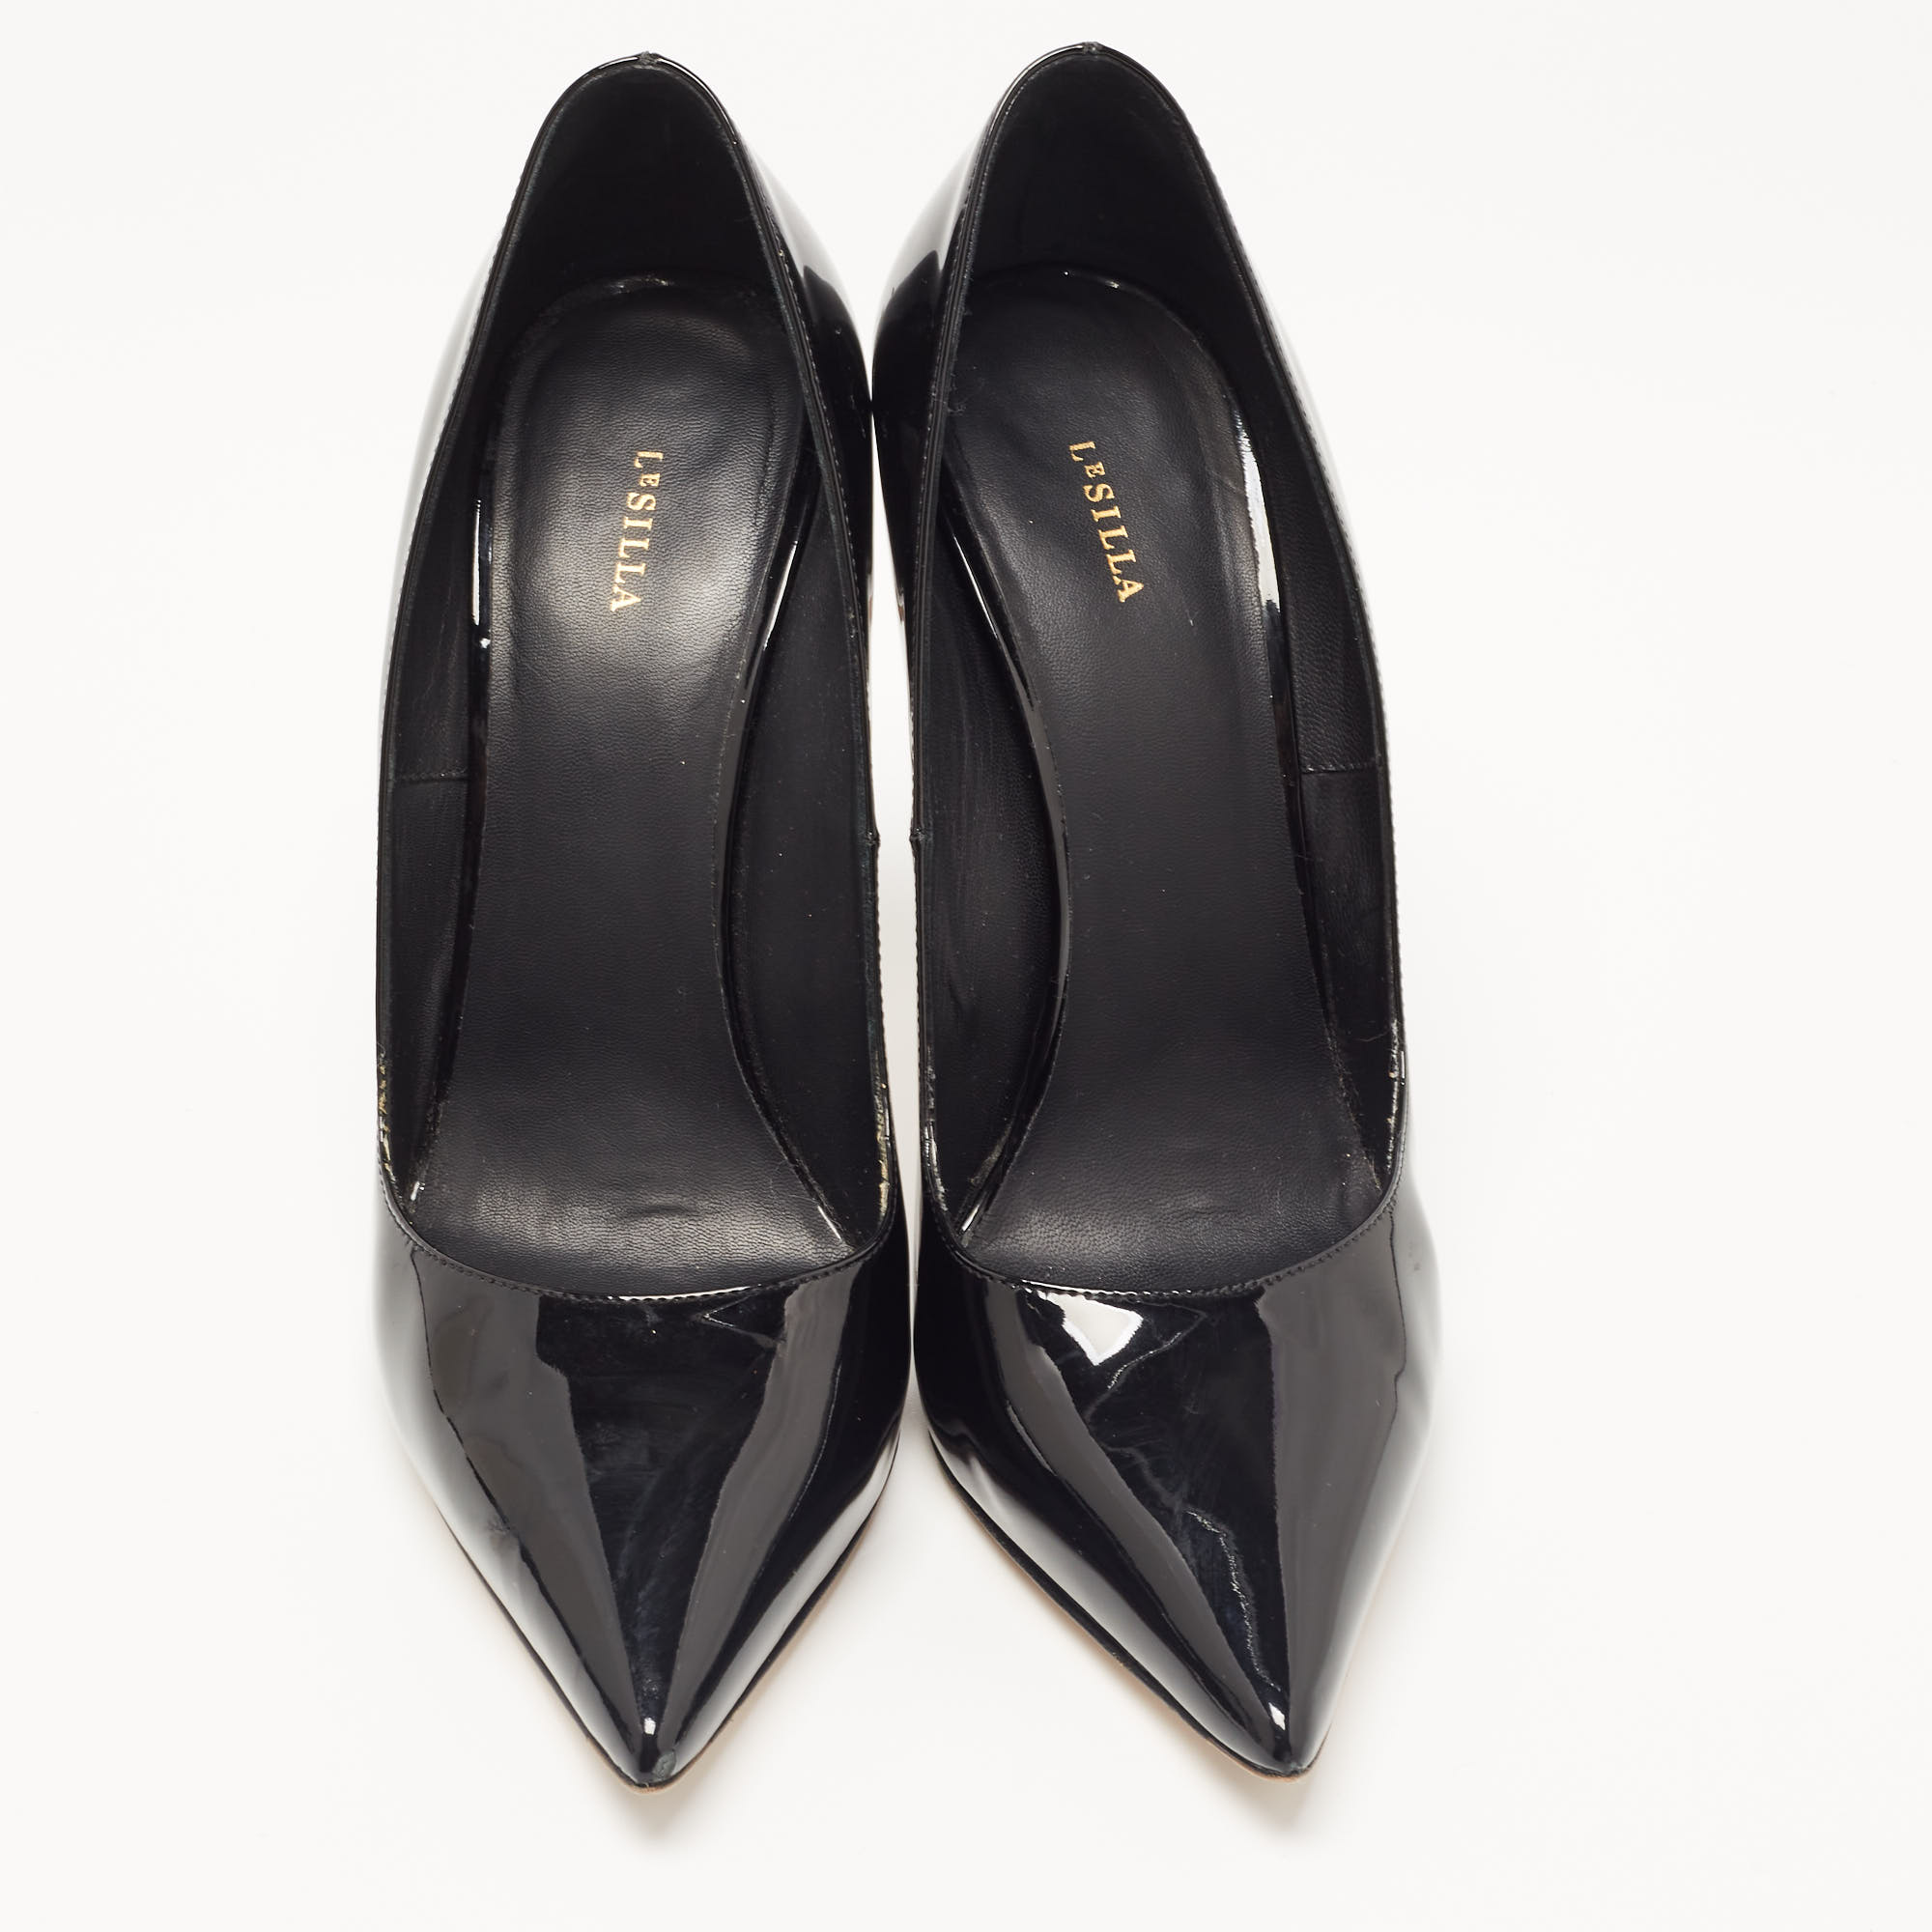 Le Silla Black Patent Leather Pointed Toe Pumps Size 39.5